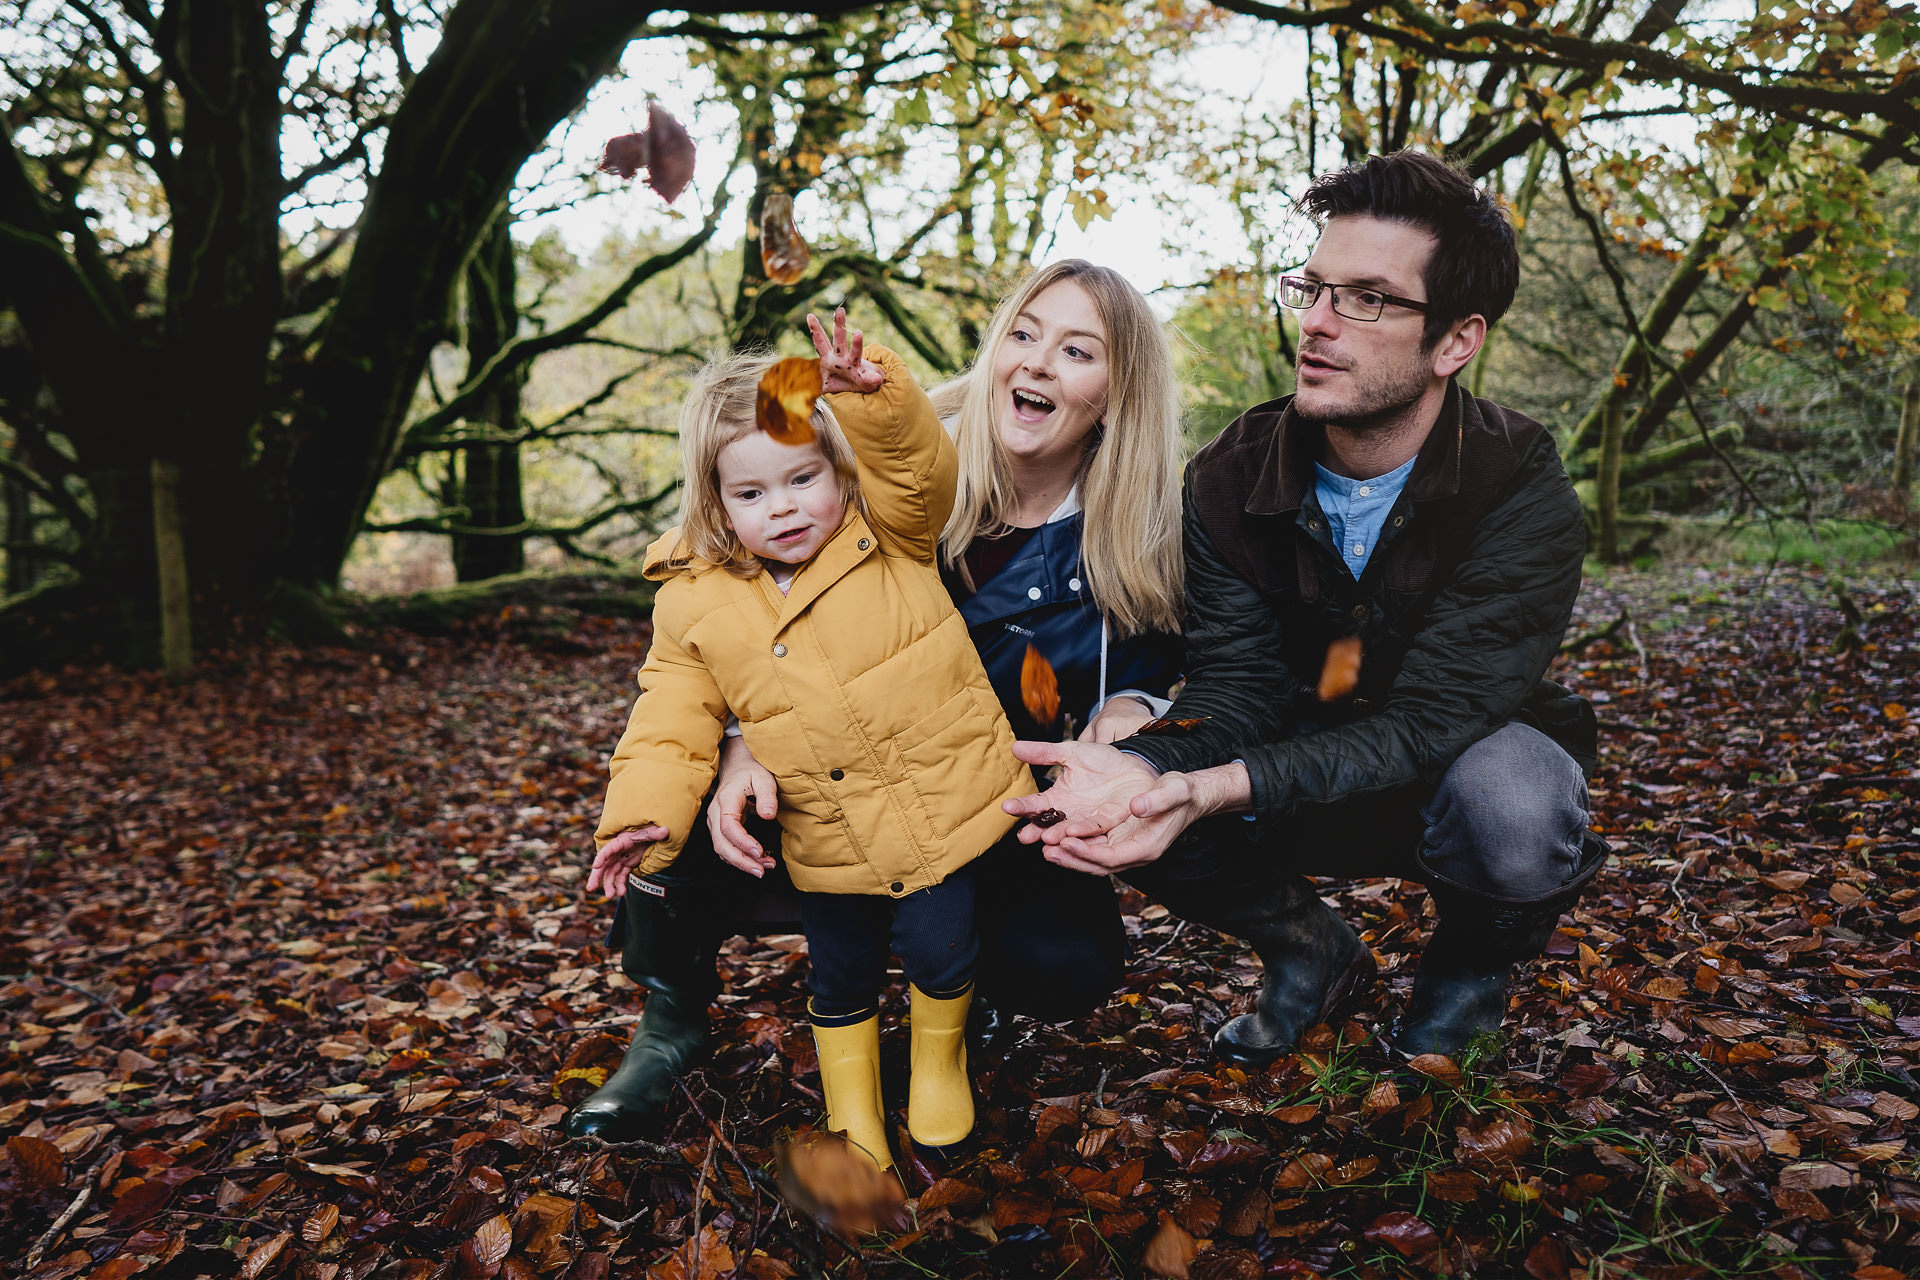 Photograph of a young family playing in autumn leaves